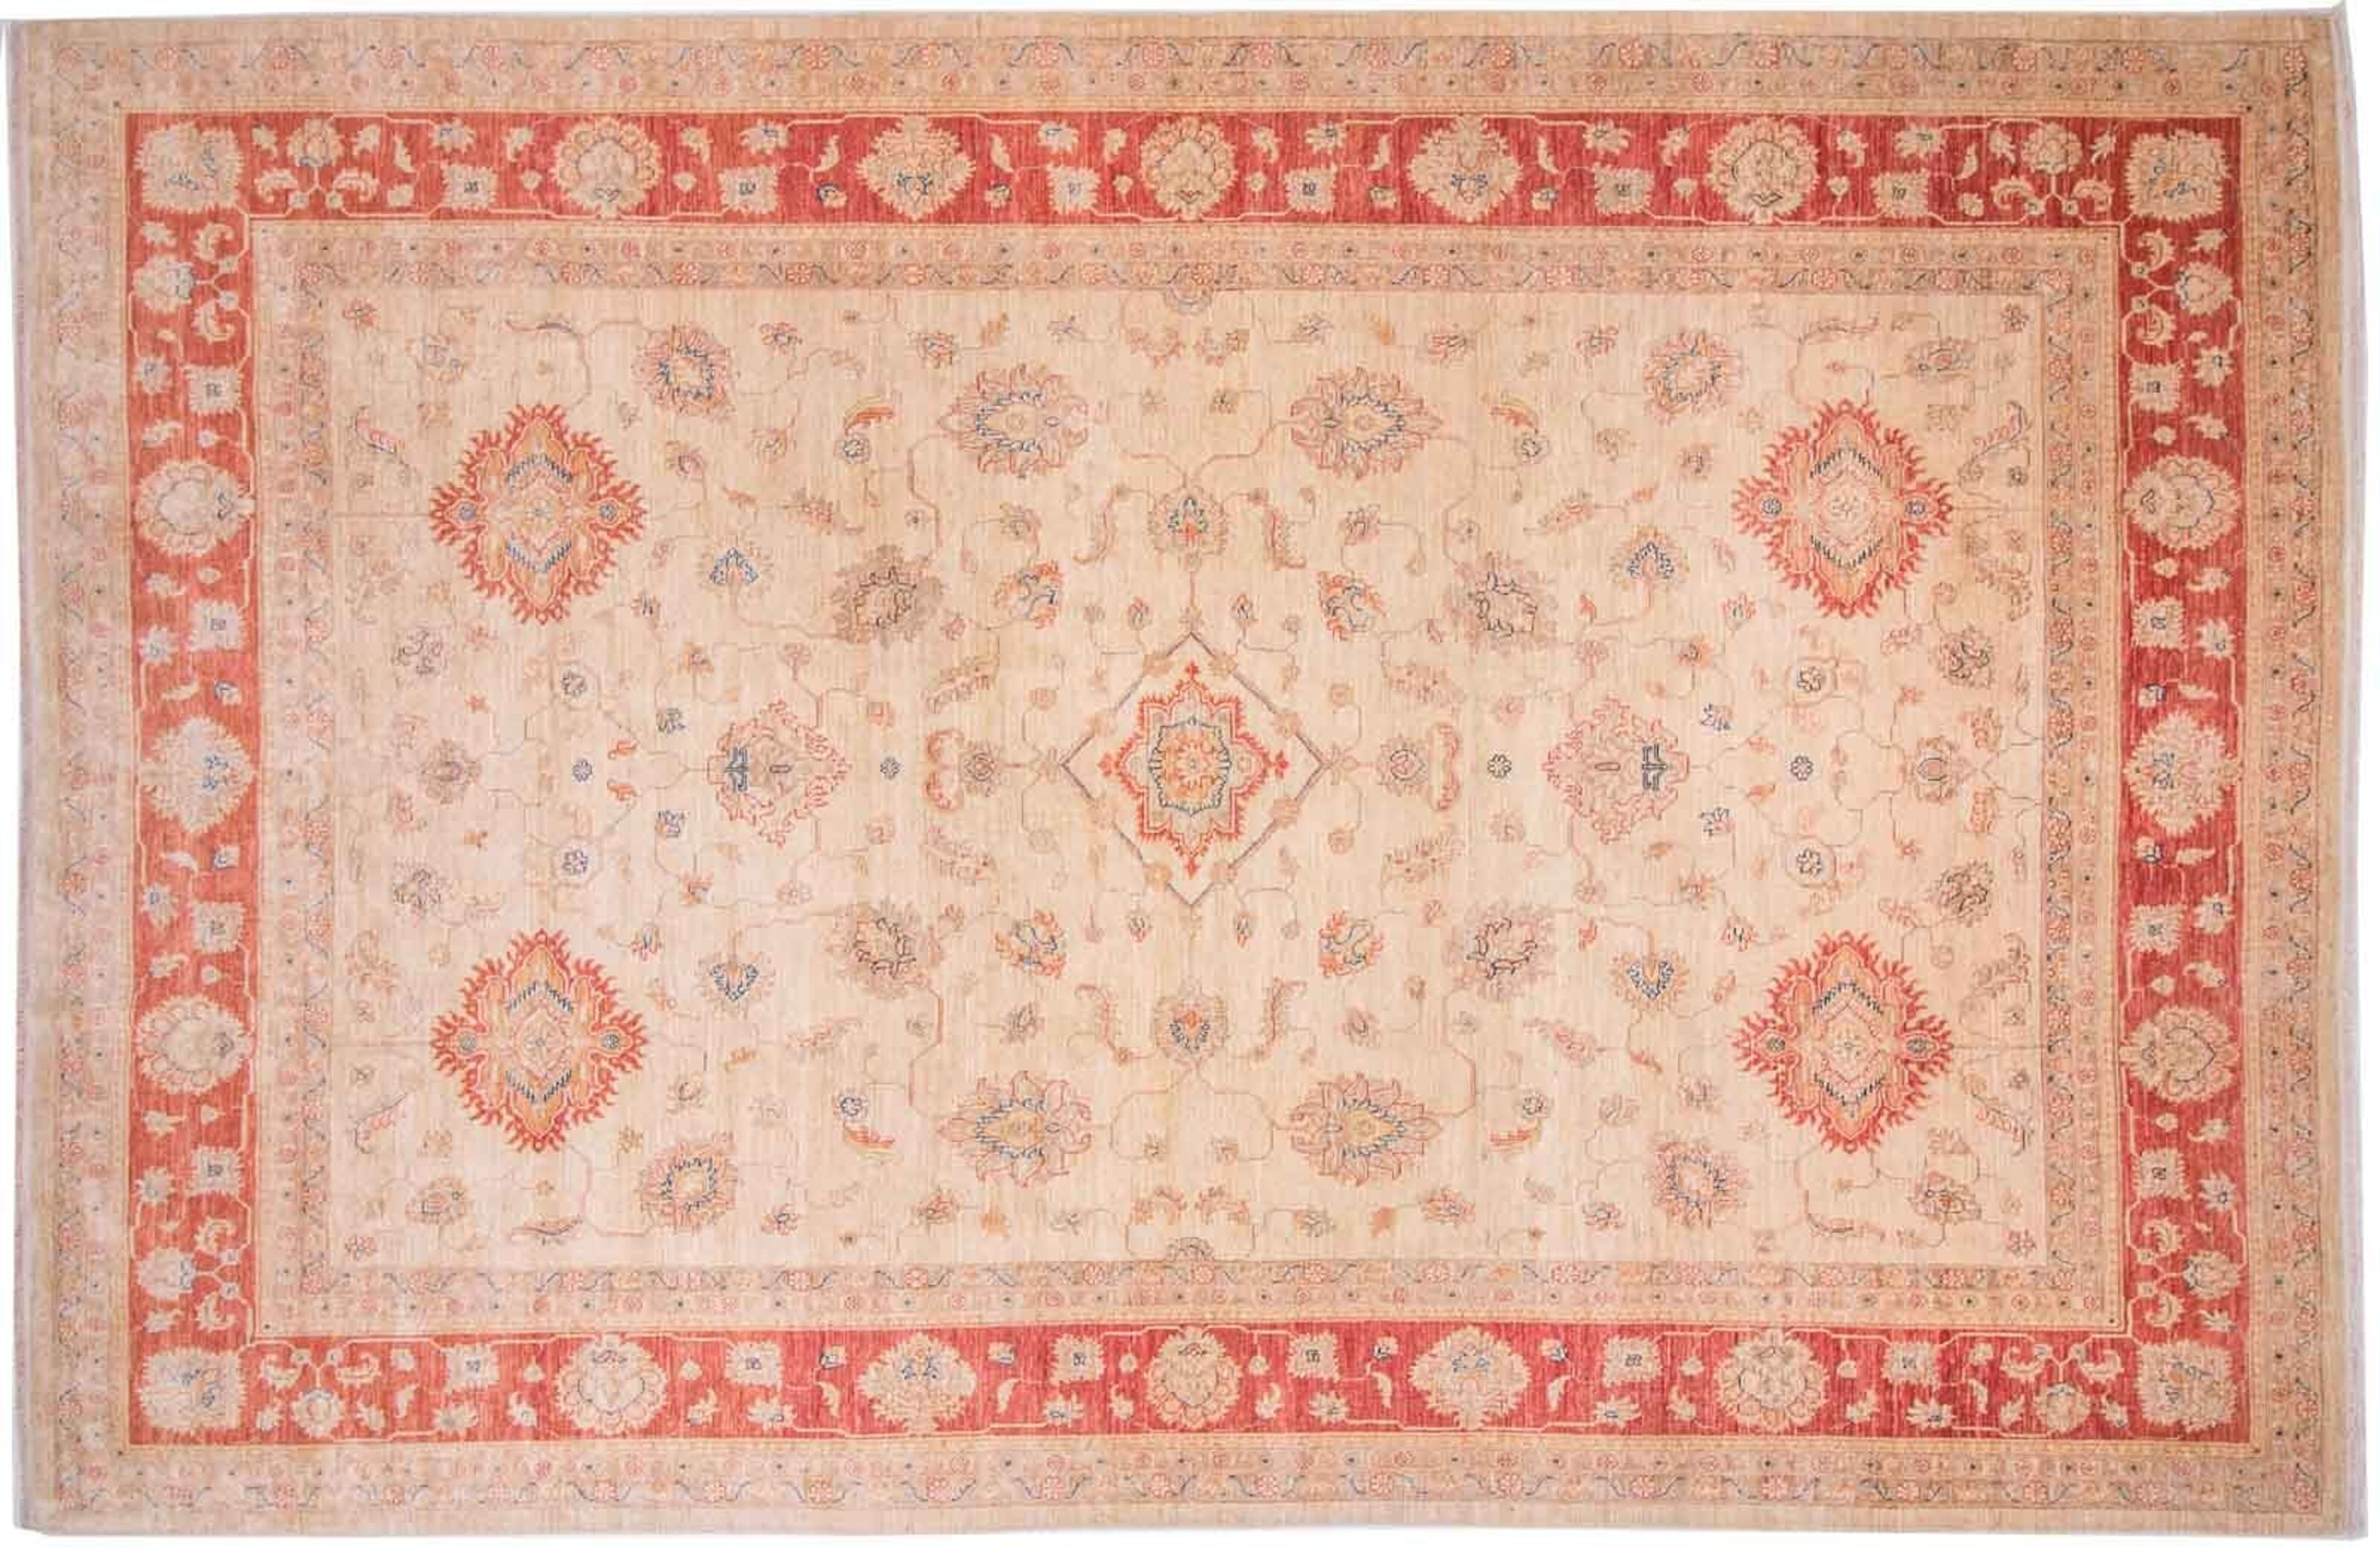 Ziegler 250x370 red Buy carpet wholesale pattern Feiner flower hand-knotted Chobi Afghan 374x248